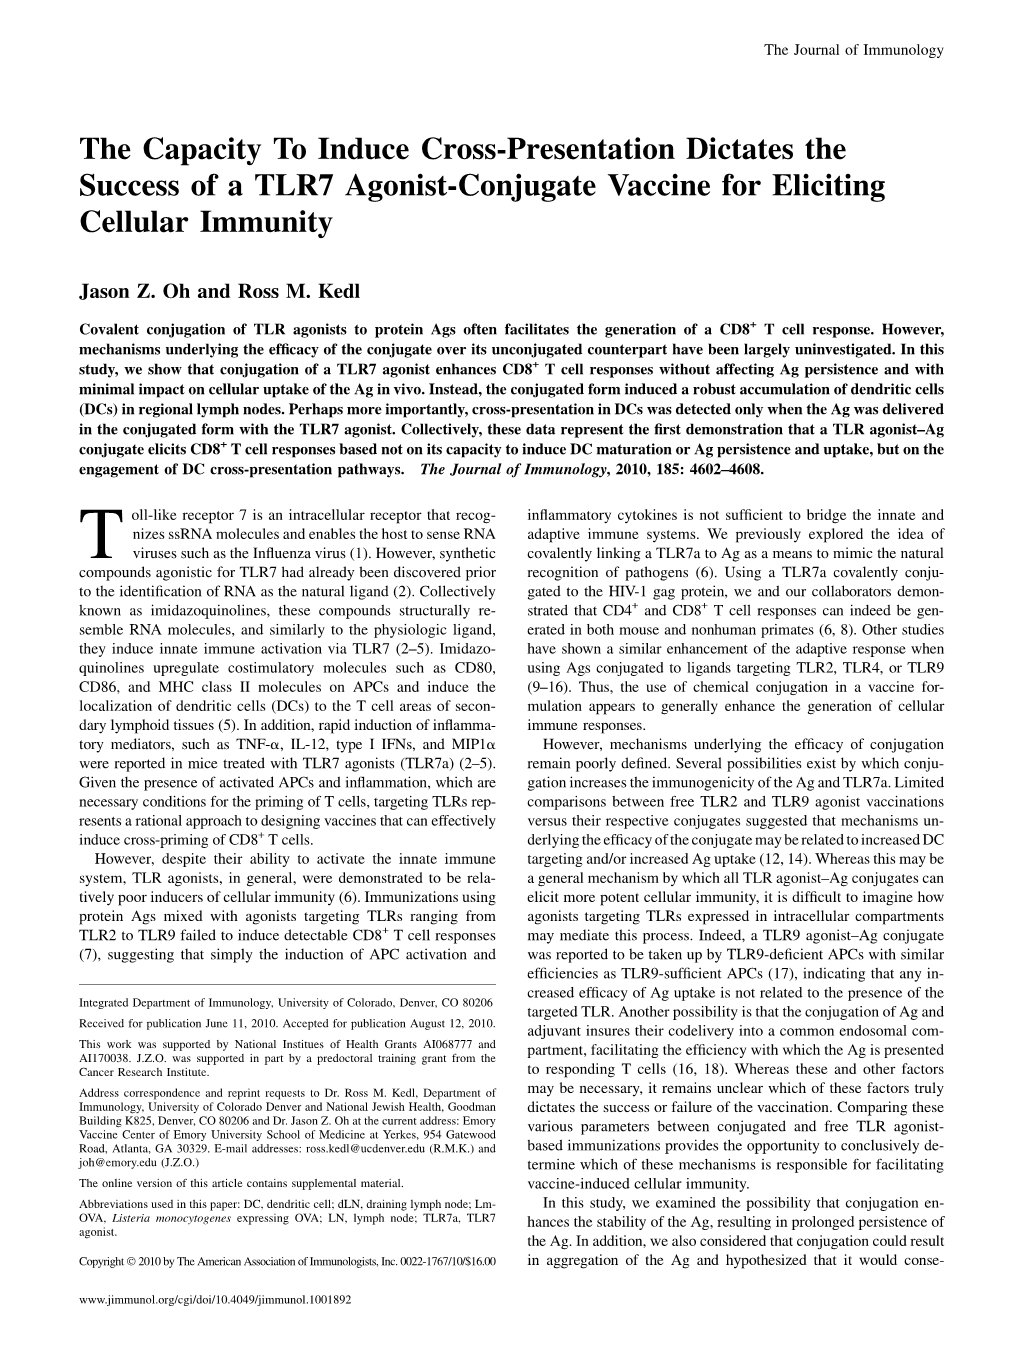 Cellular Immunity Agonist-Conjugate Vaccine for Eliciting Dictates The